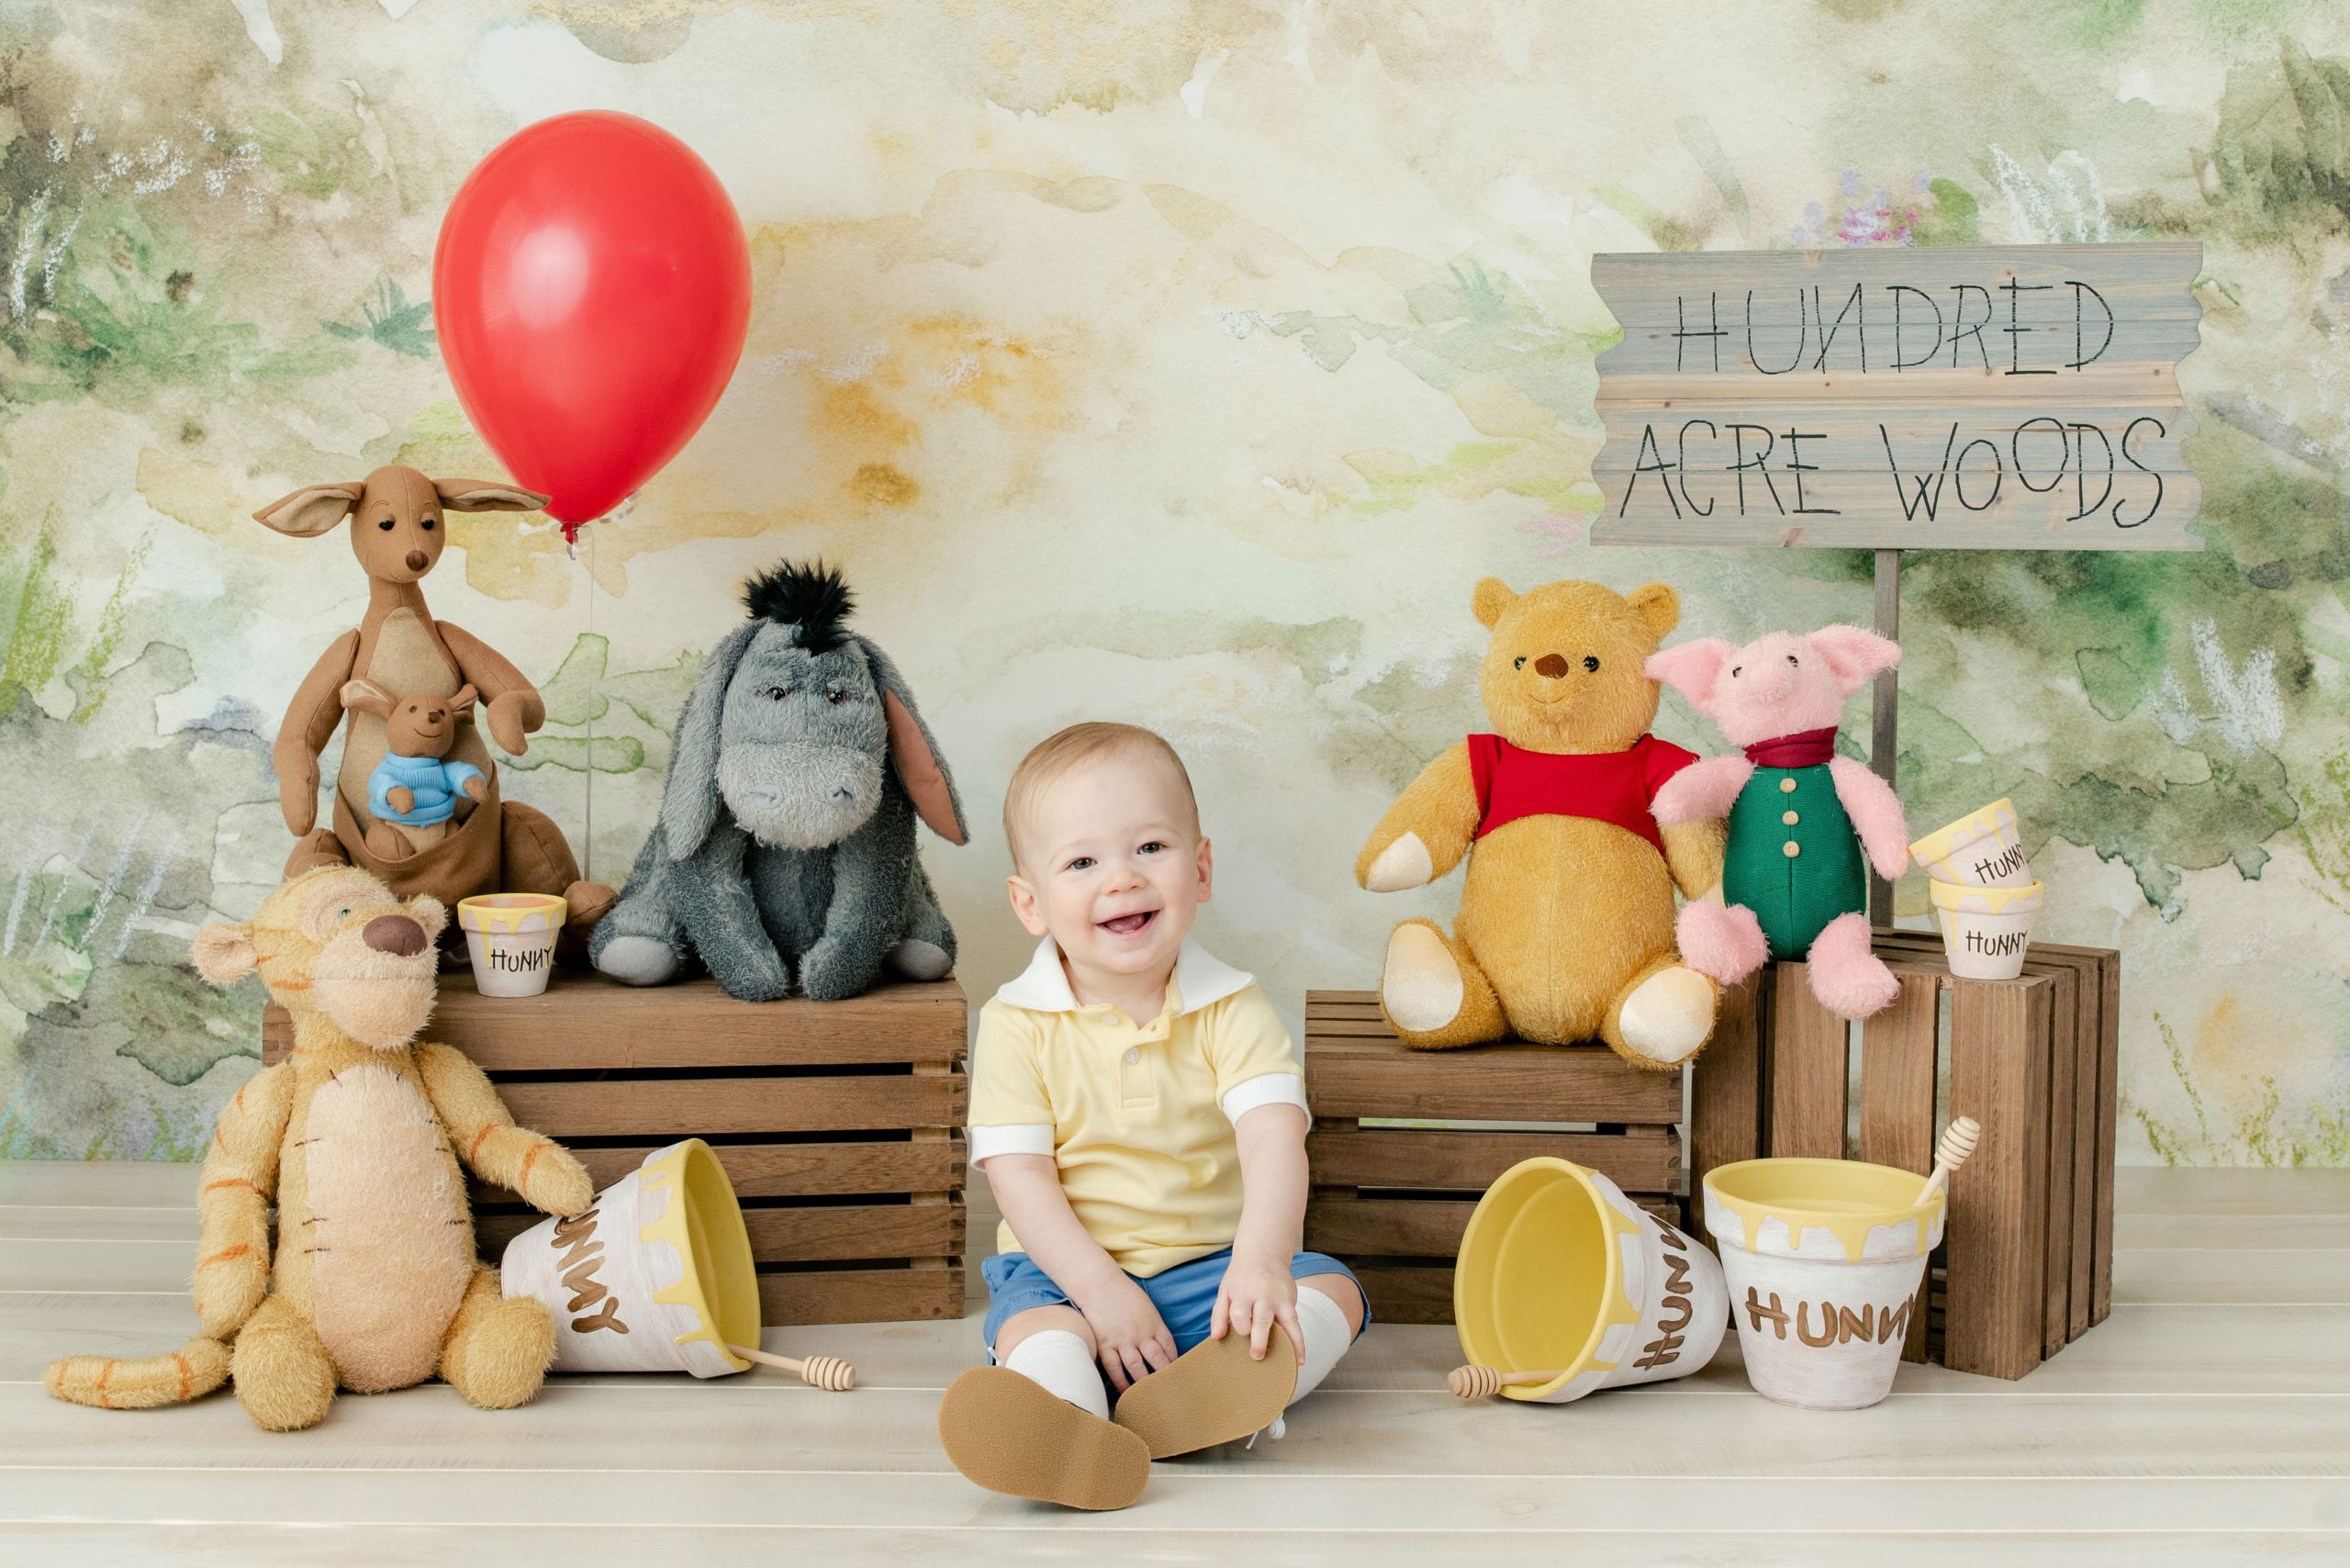 A Winnie the Pooh first birthday part complete with a hunny pot cake, Mr. Sanders' Fishing Hole, Hundred Acre Wood, and more!